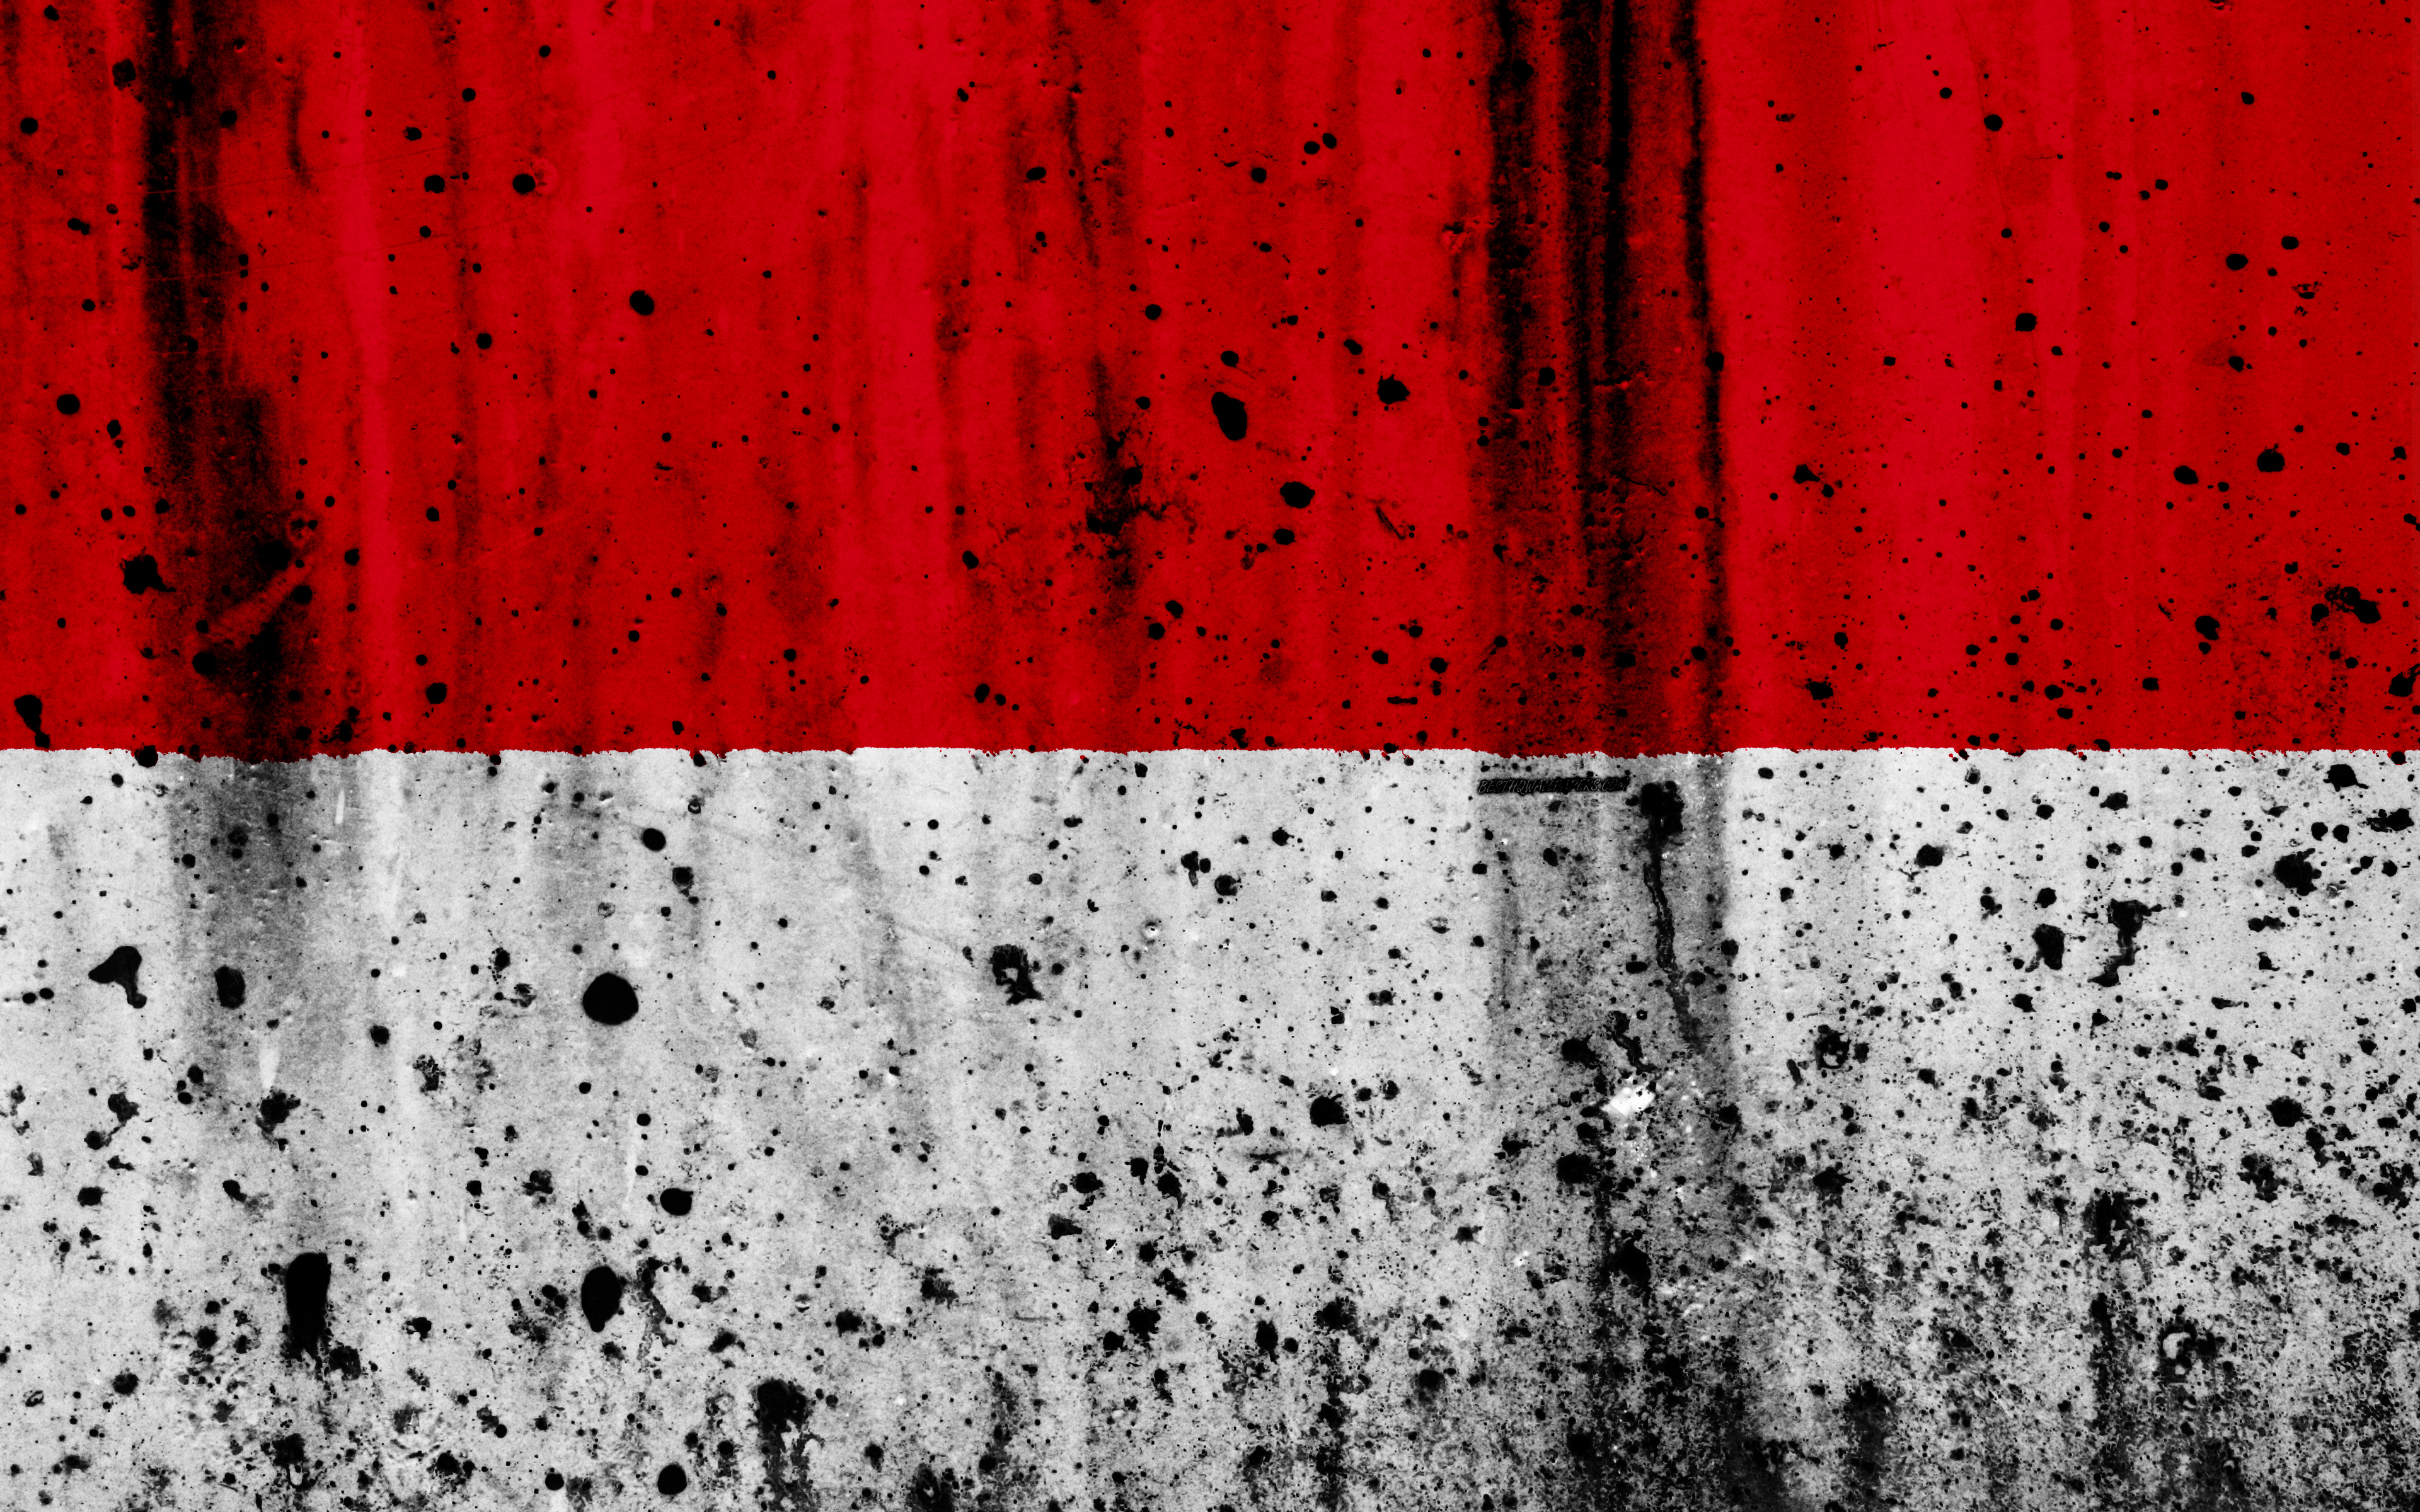 Download wallpaper Indonesian flag, 4k, grunge, flag of Indonesia, Oceania, Indonesia, national symbols, Indonesia national flag for desktop with resolution 3840x2400. High Quality HD picture wallpaper